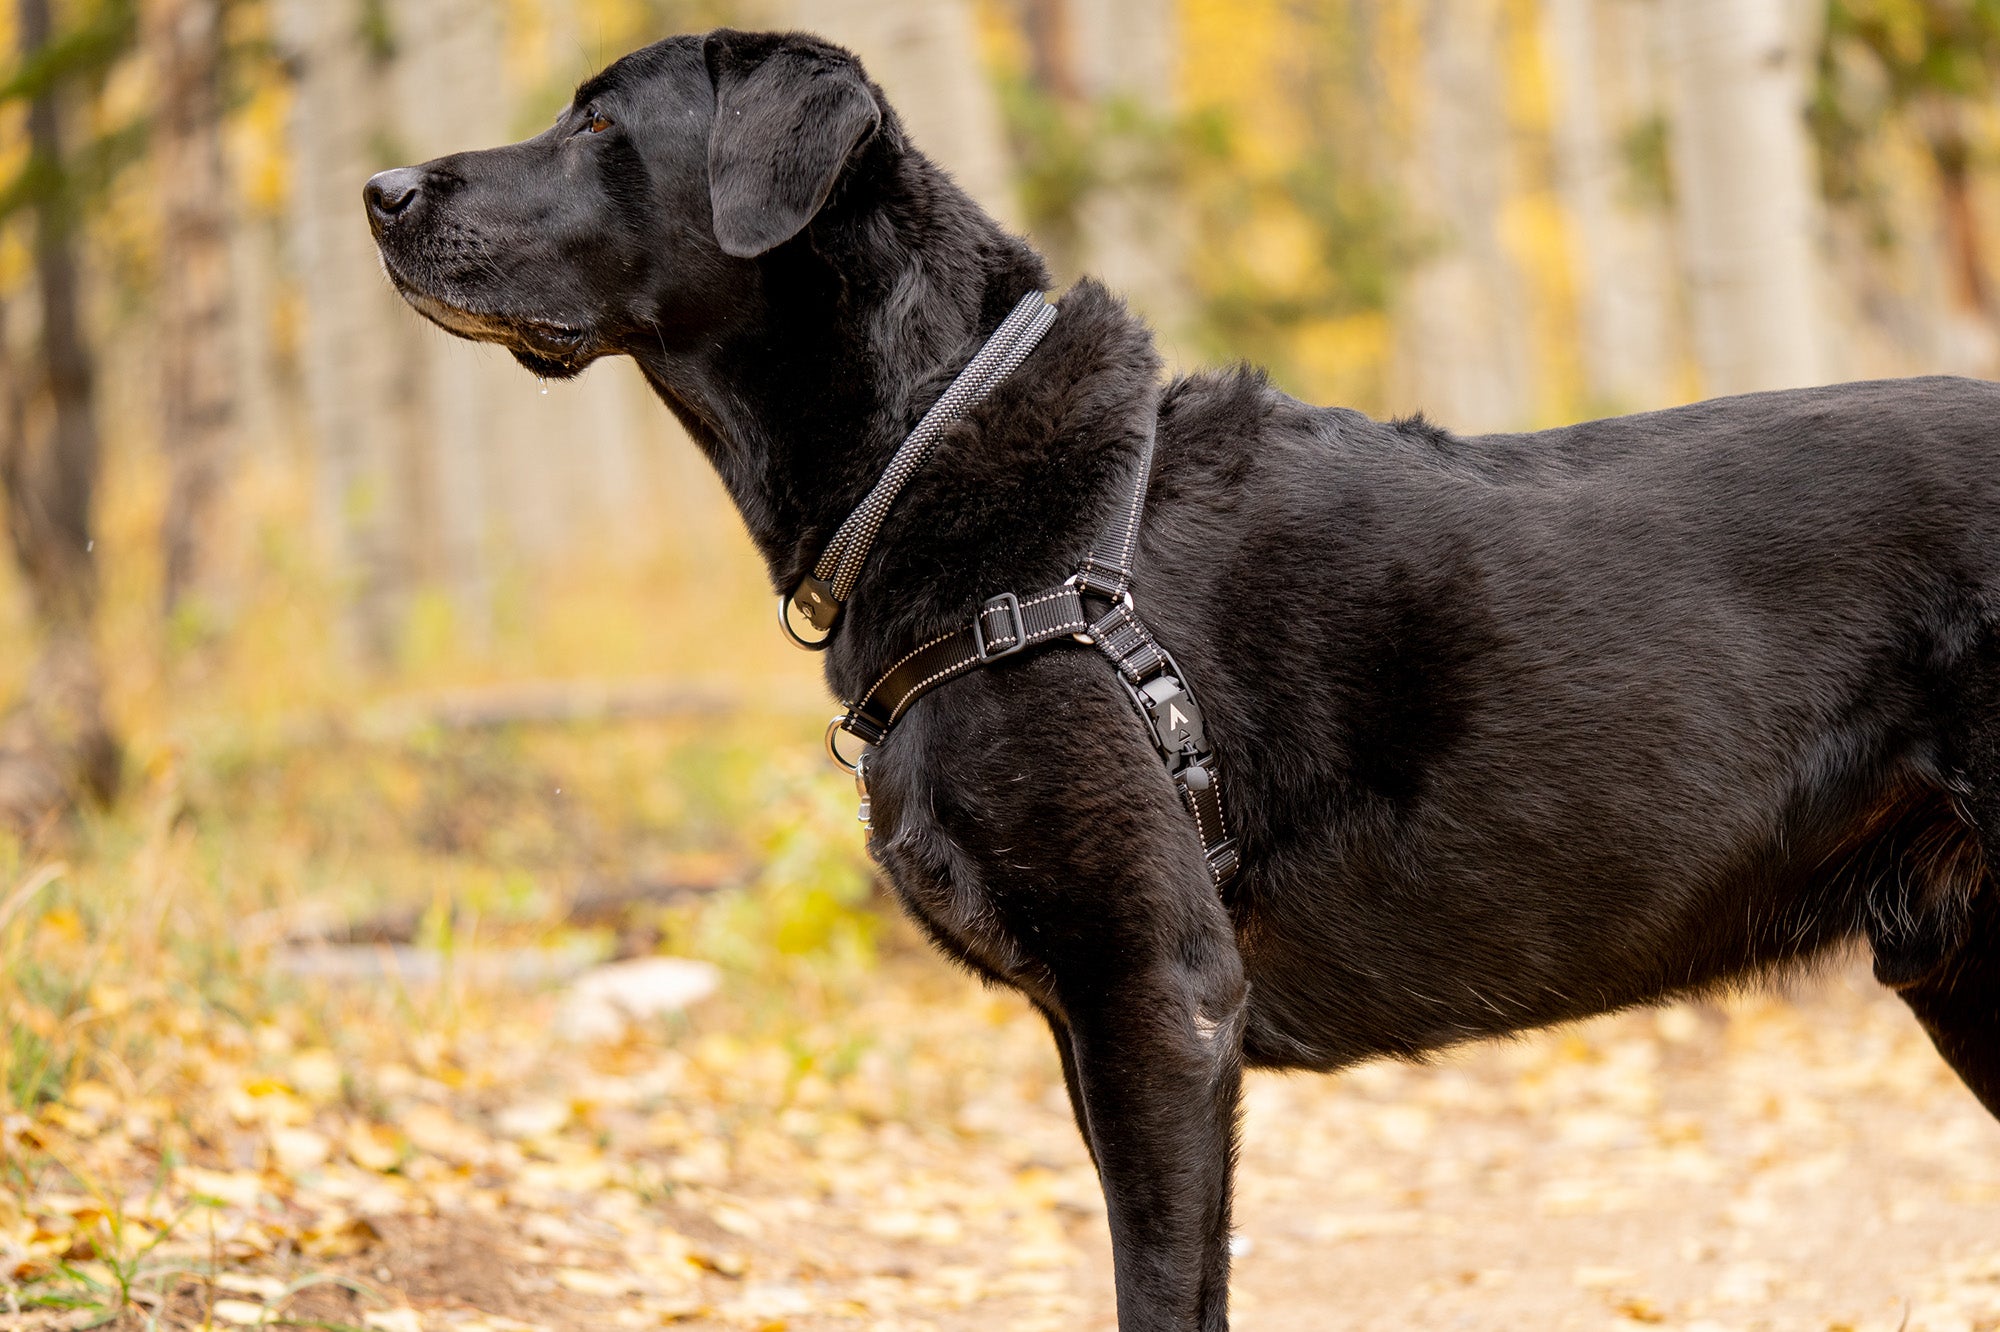 atlas pet company lifetime harness with atlas the labrador standing in aspen trees wearing harness and collar